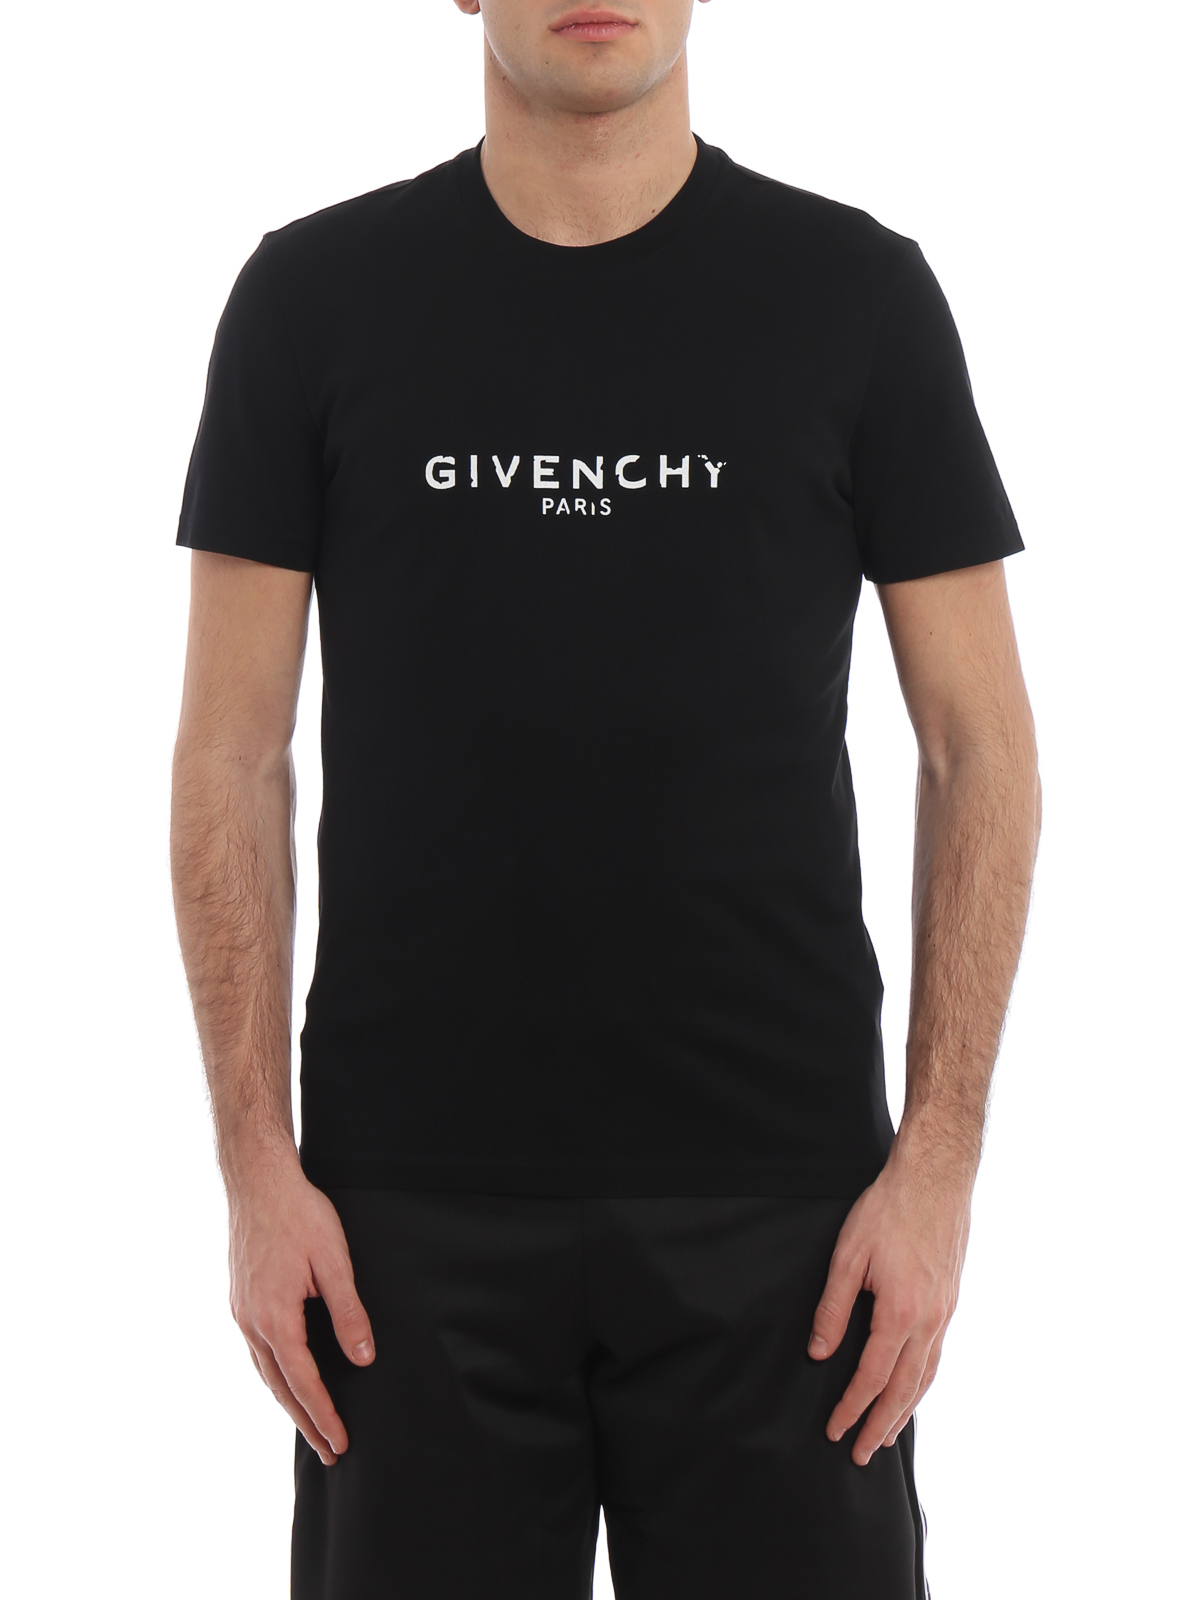 Tシャツ Givenchy - Tシャツ - 黒 - BM70K93002001 | THEBS [iKRIX]